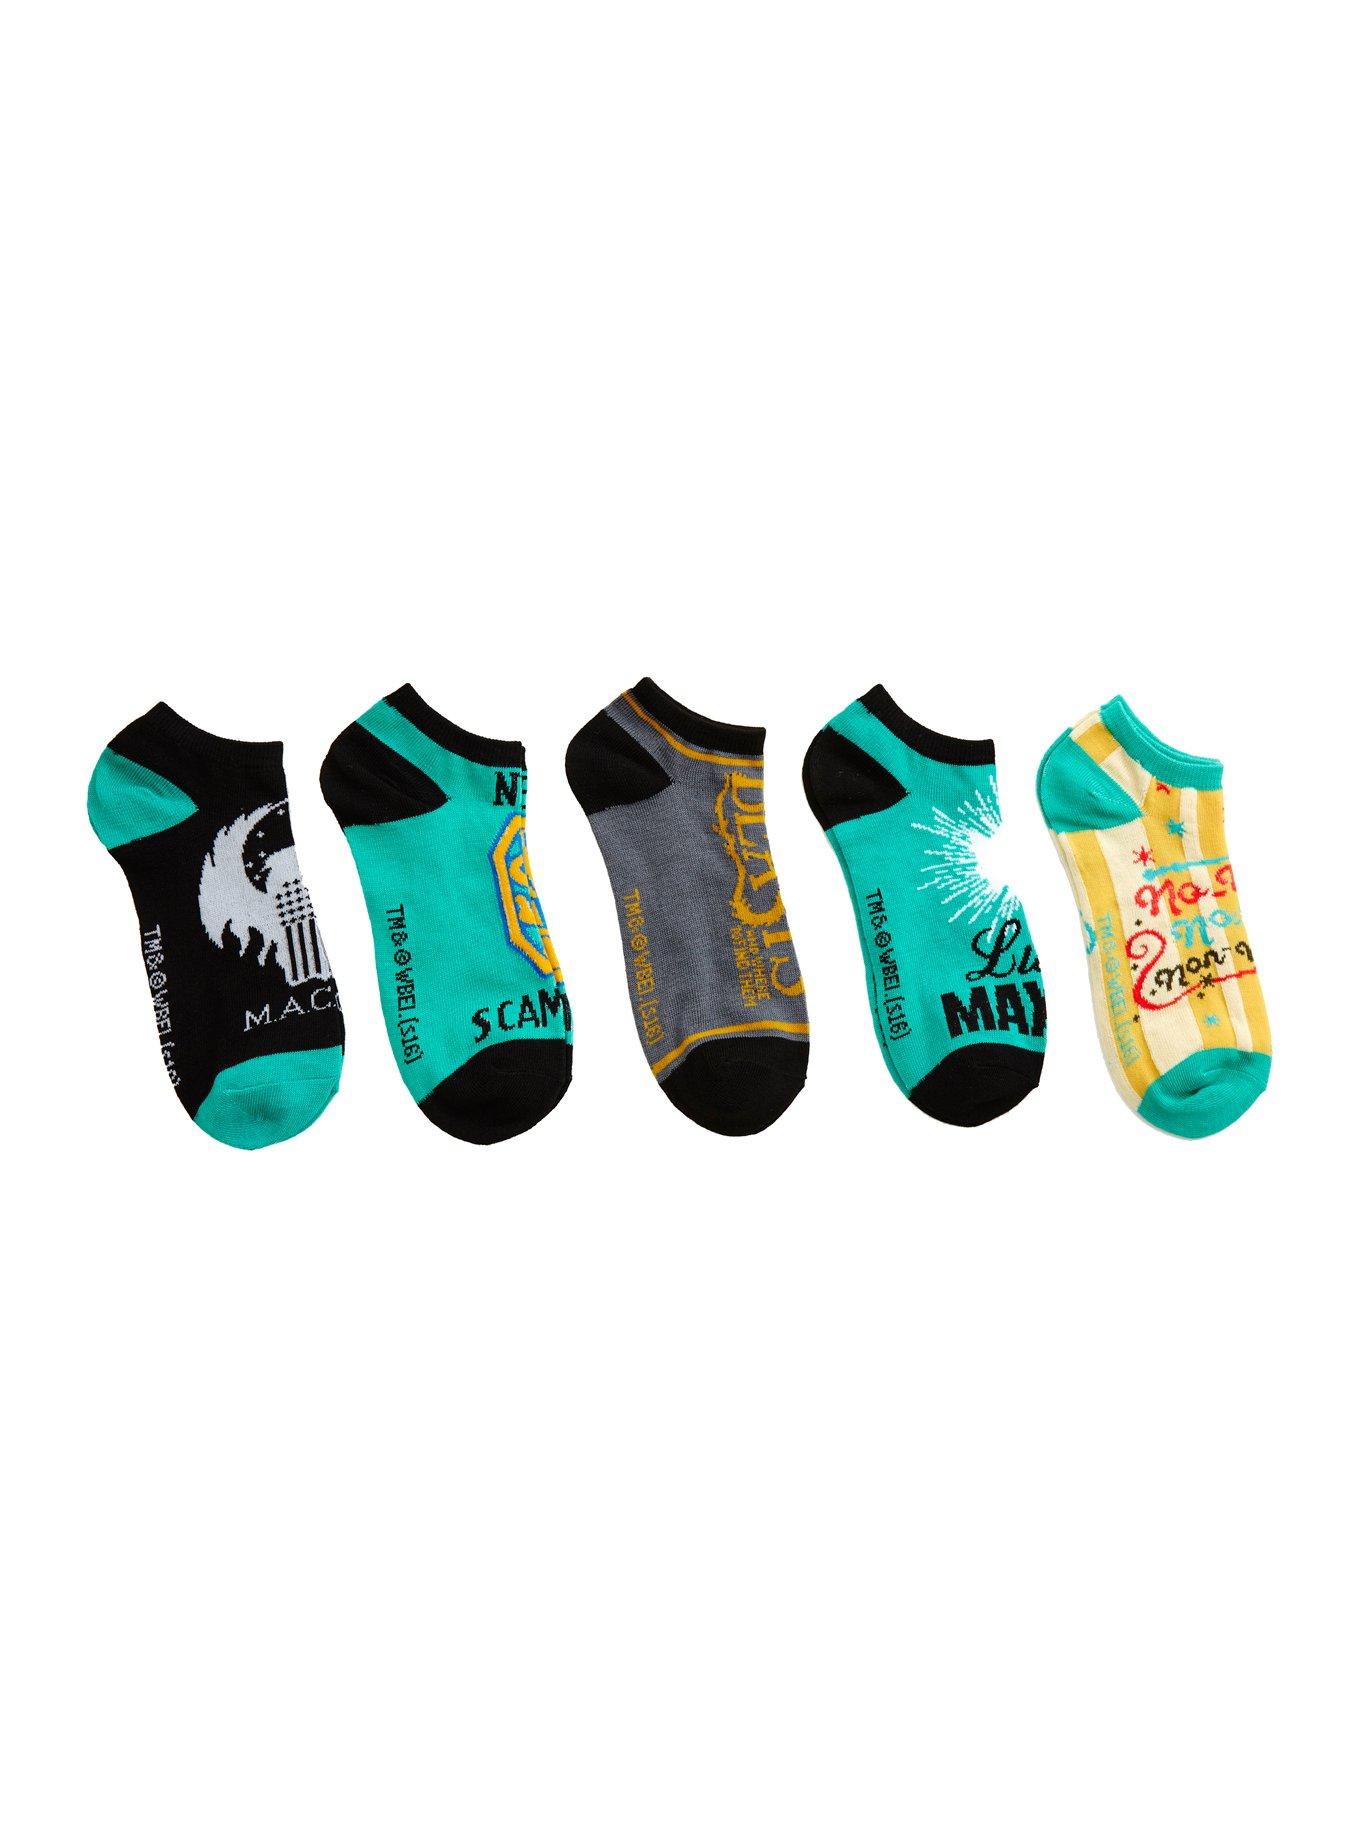 Fantastic Beasts And Where To Find Them No-Show Socks 5 Pair, , hi-res